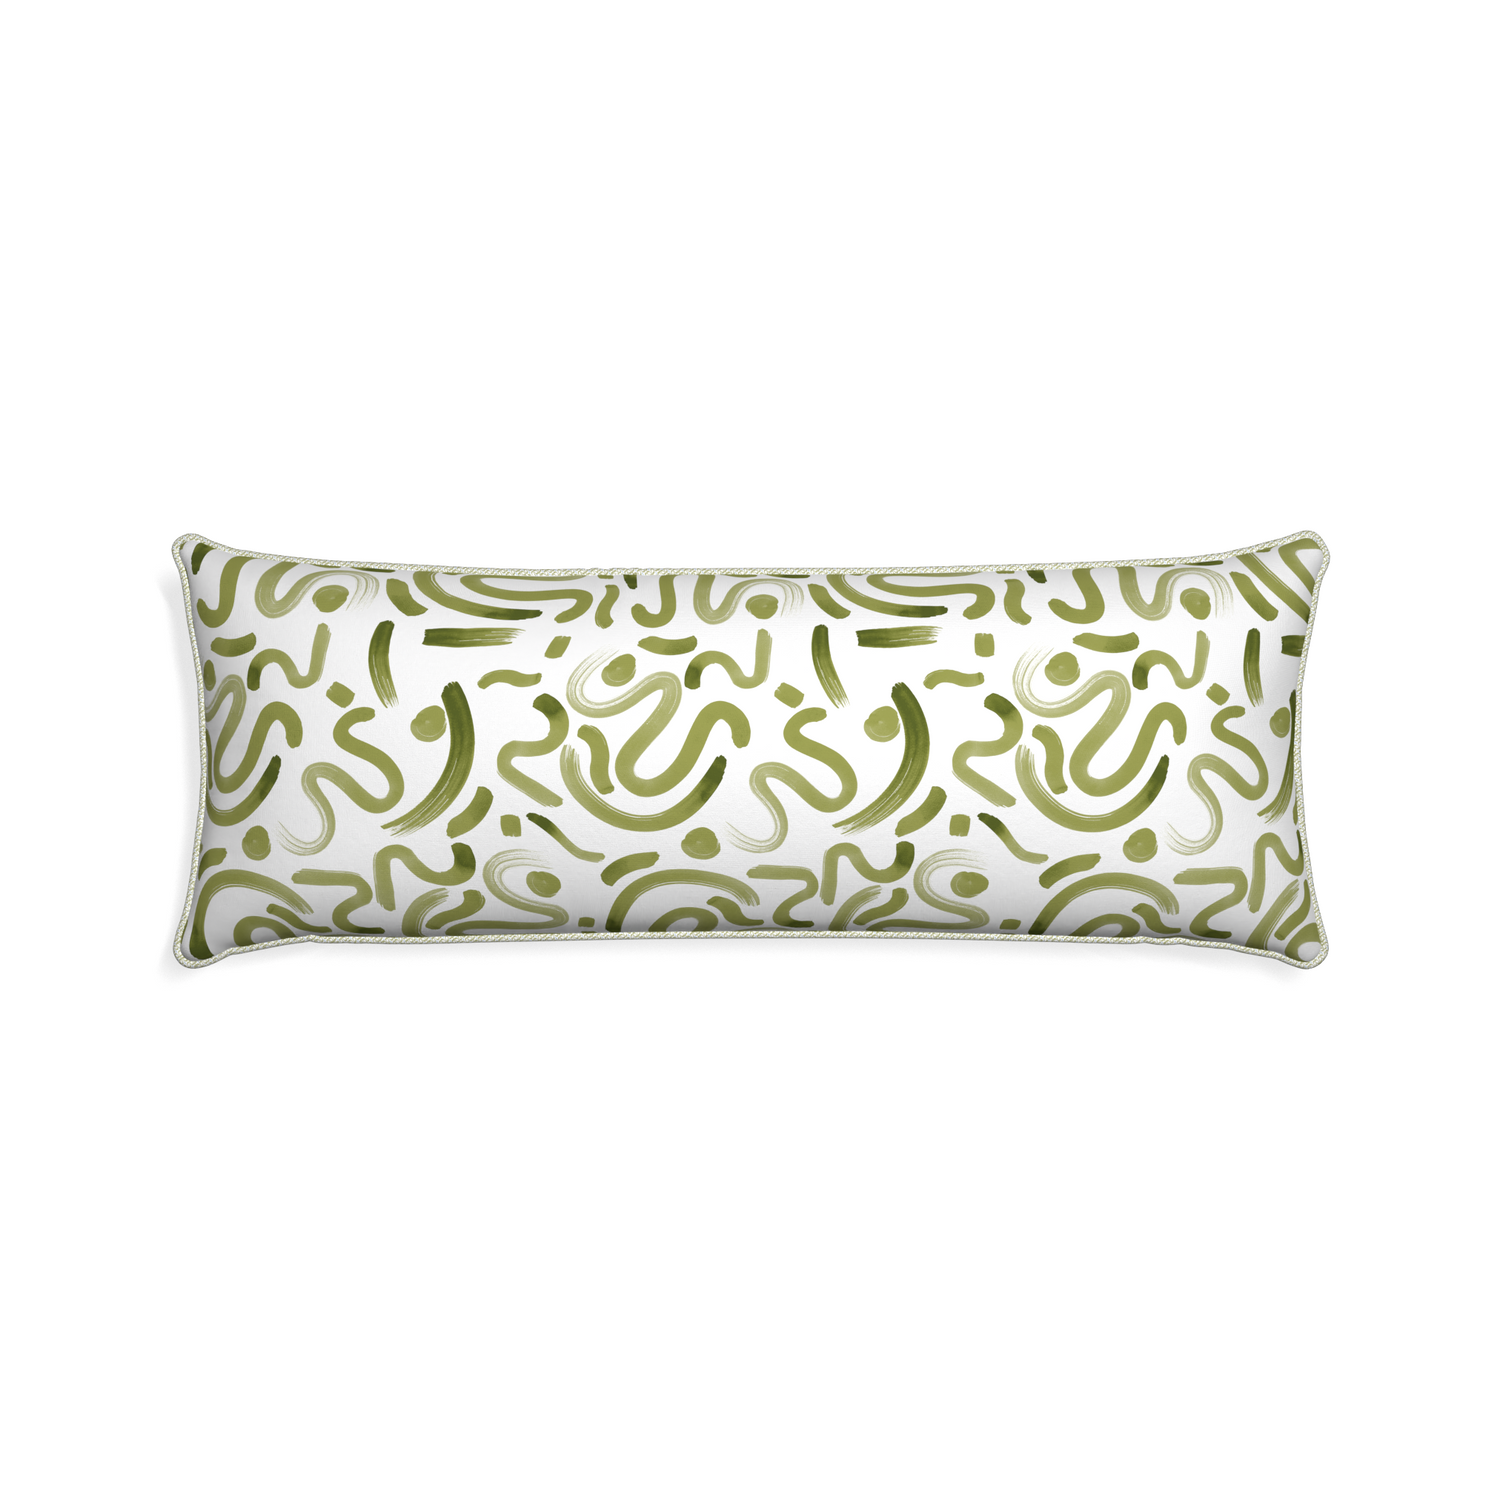 Xl-lumbar hockney moss custom moss greenpillow with l piping on white background